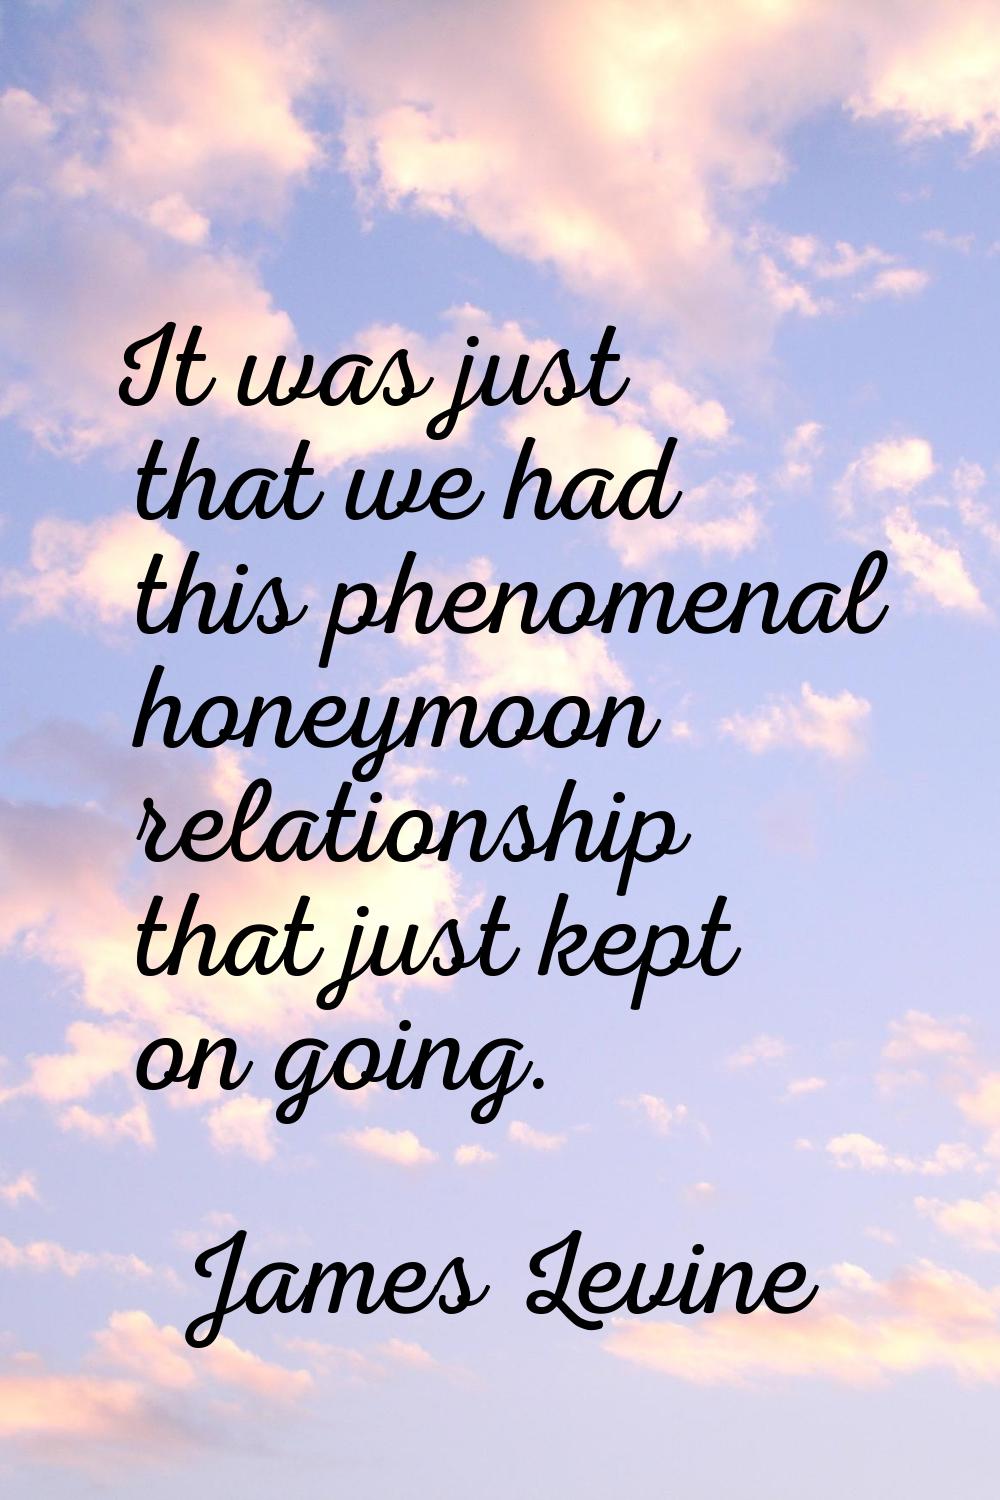 It was just that we had this phenomenal honeymoon relationship that just kept on going.